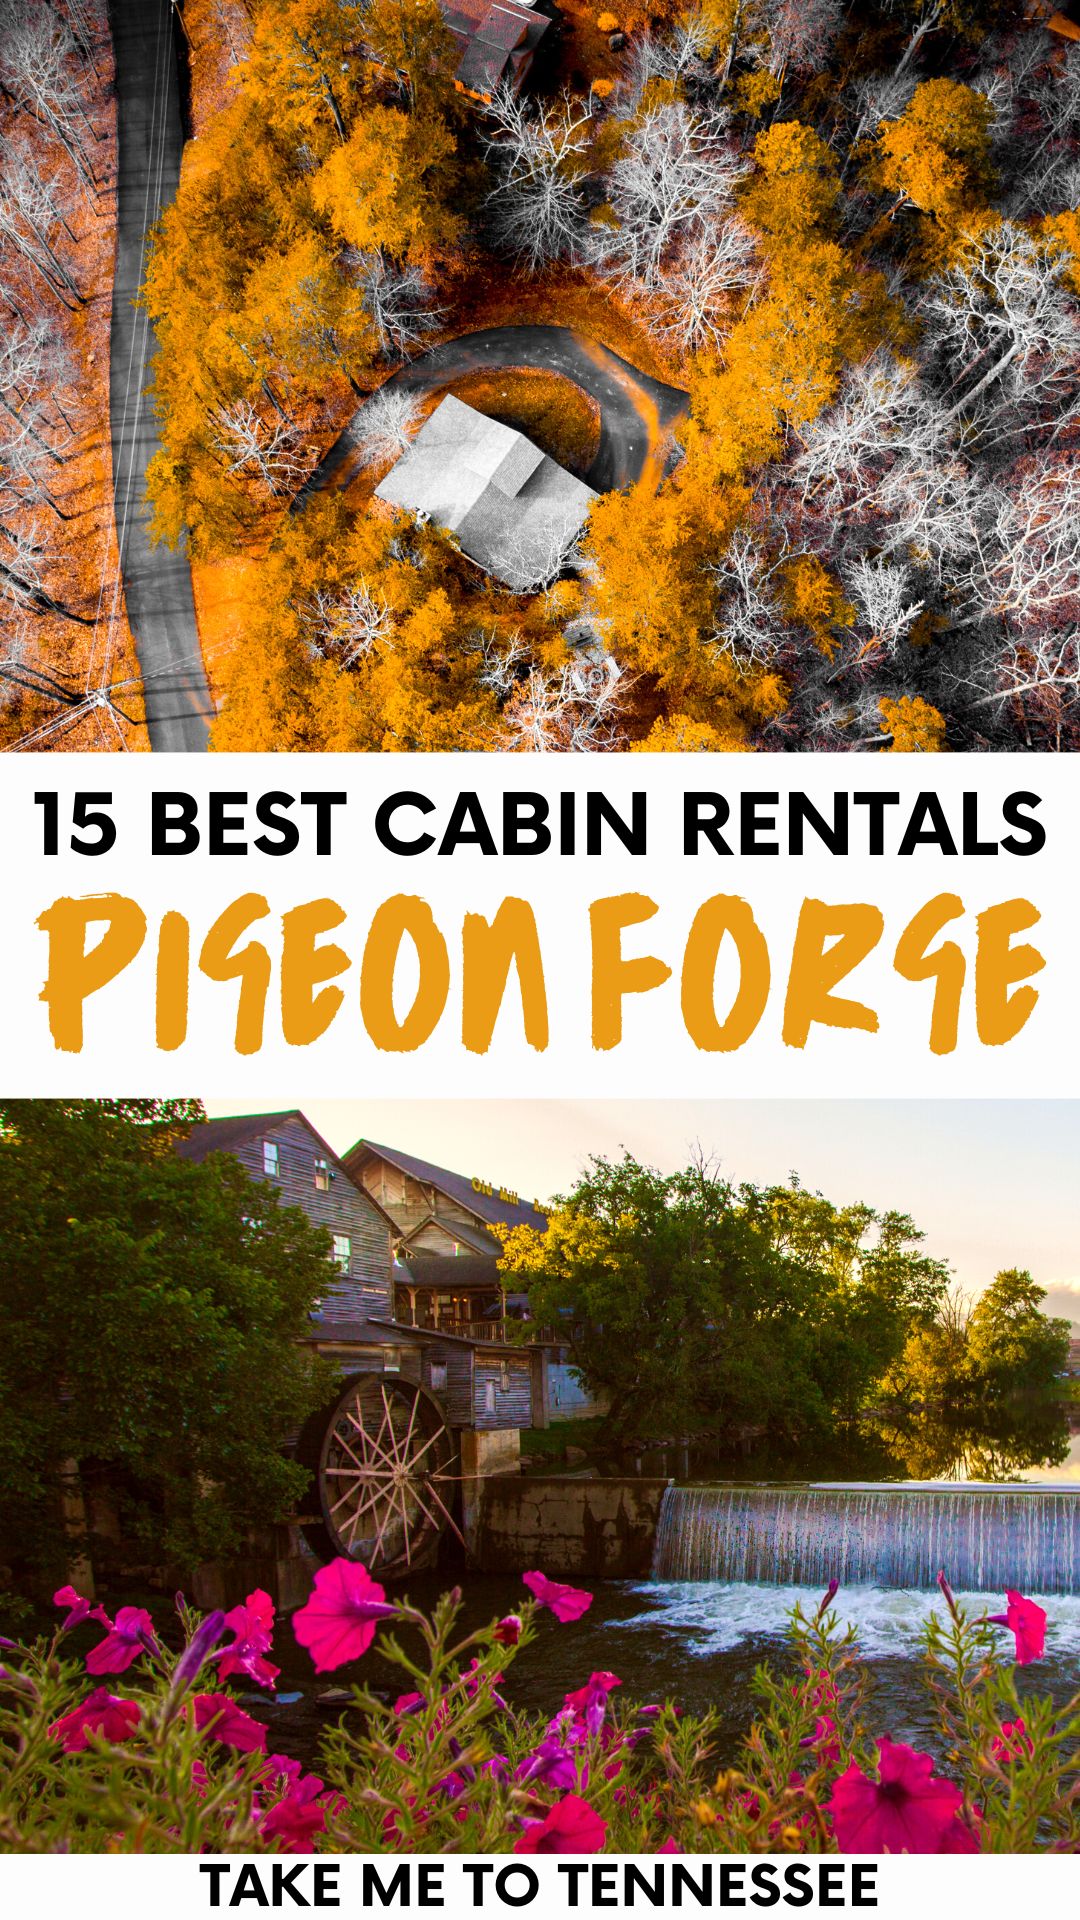 Gallery images of cabins in Pigeon Forge with text overlay.